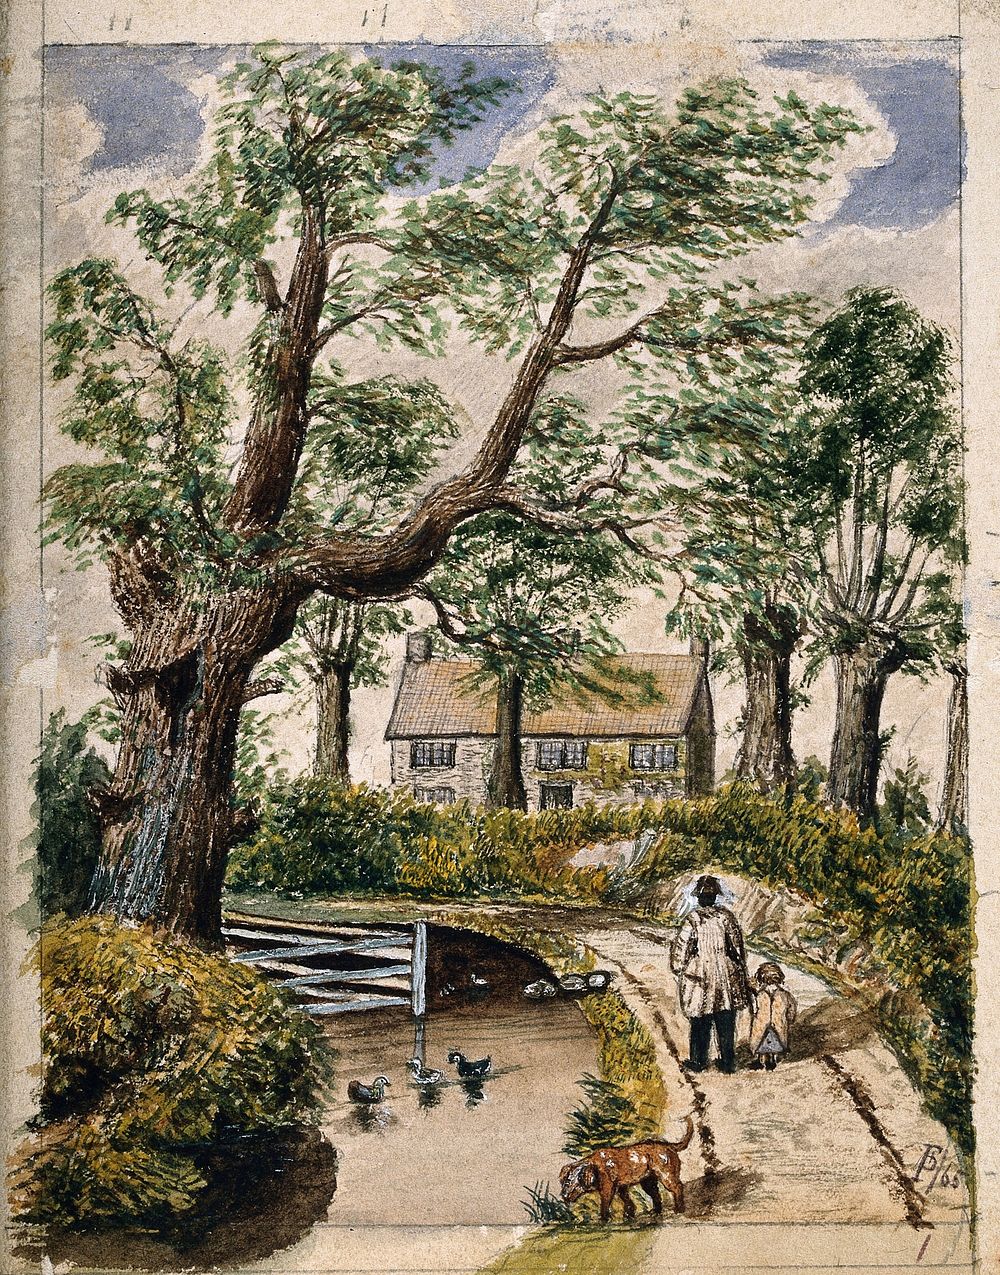 The cottage in which Edward Jenner first tried vaccination; foreground: trees, pond with ducks, bridge and path with man and…